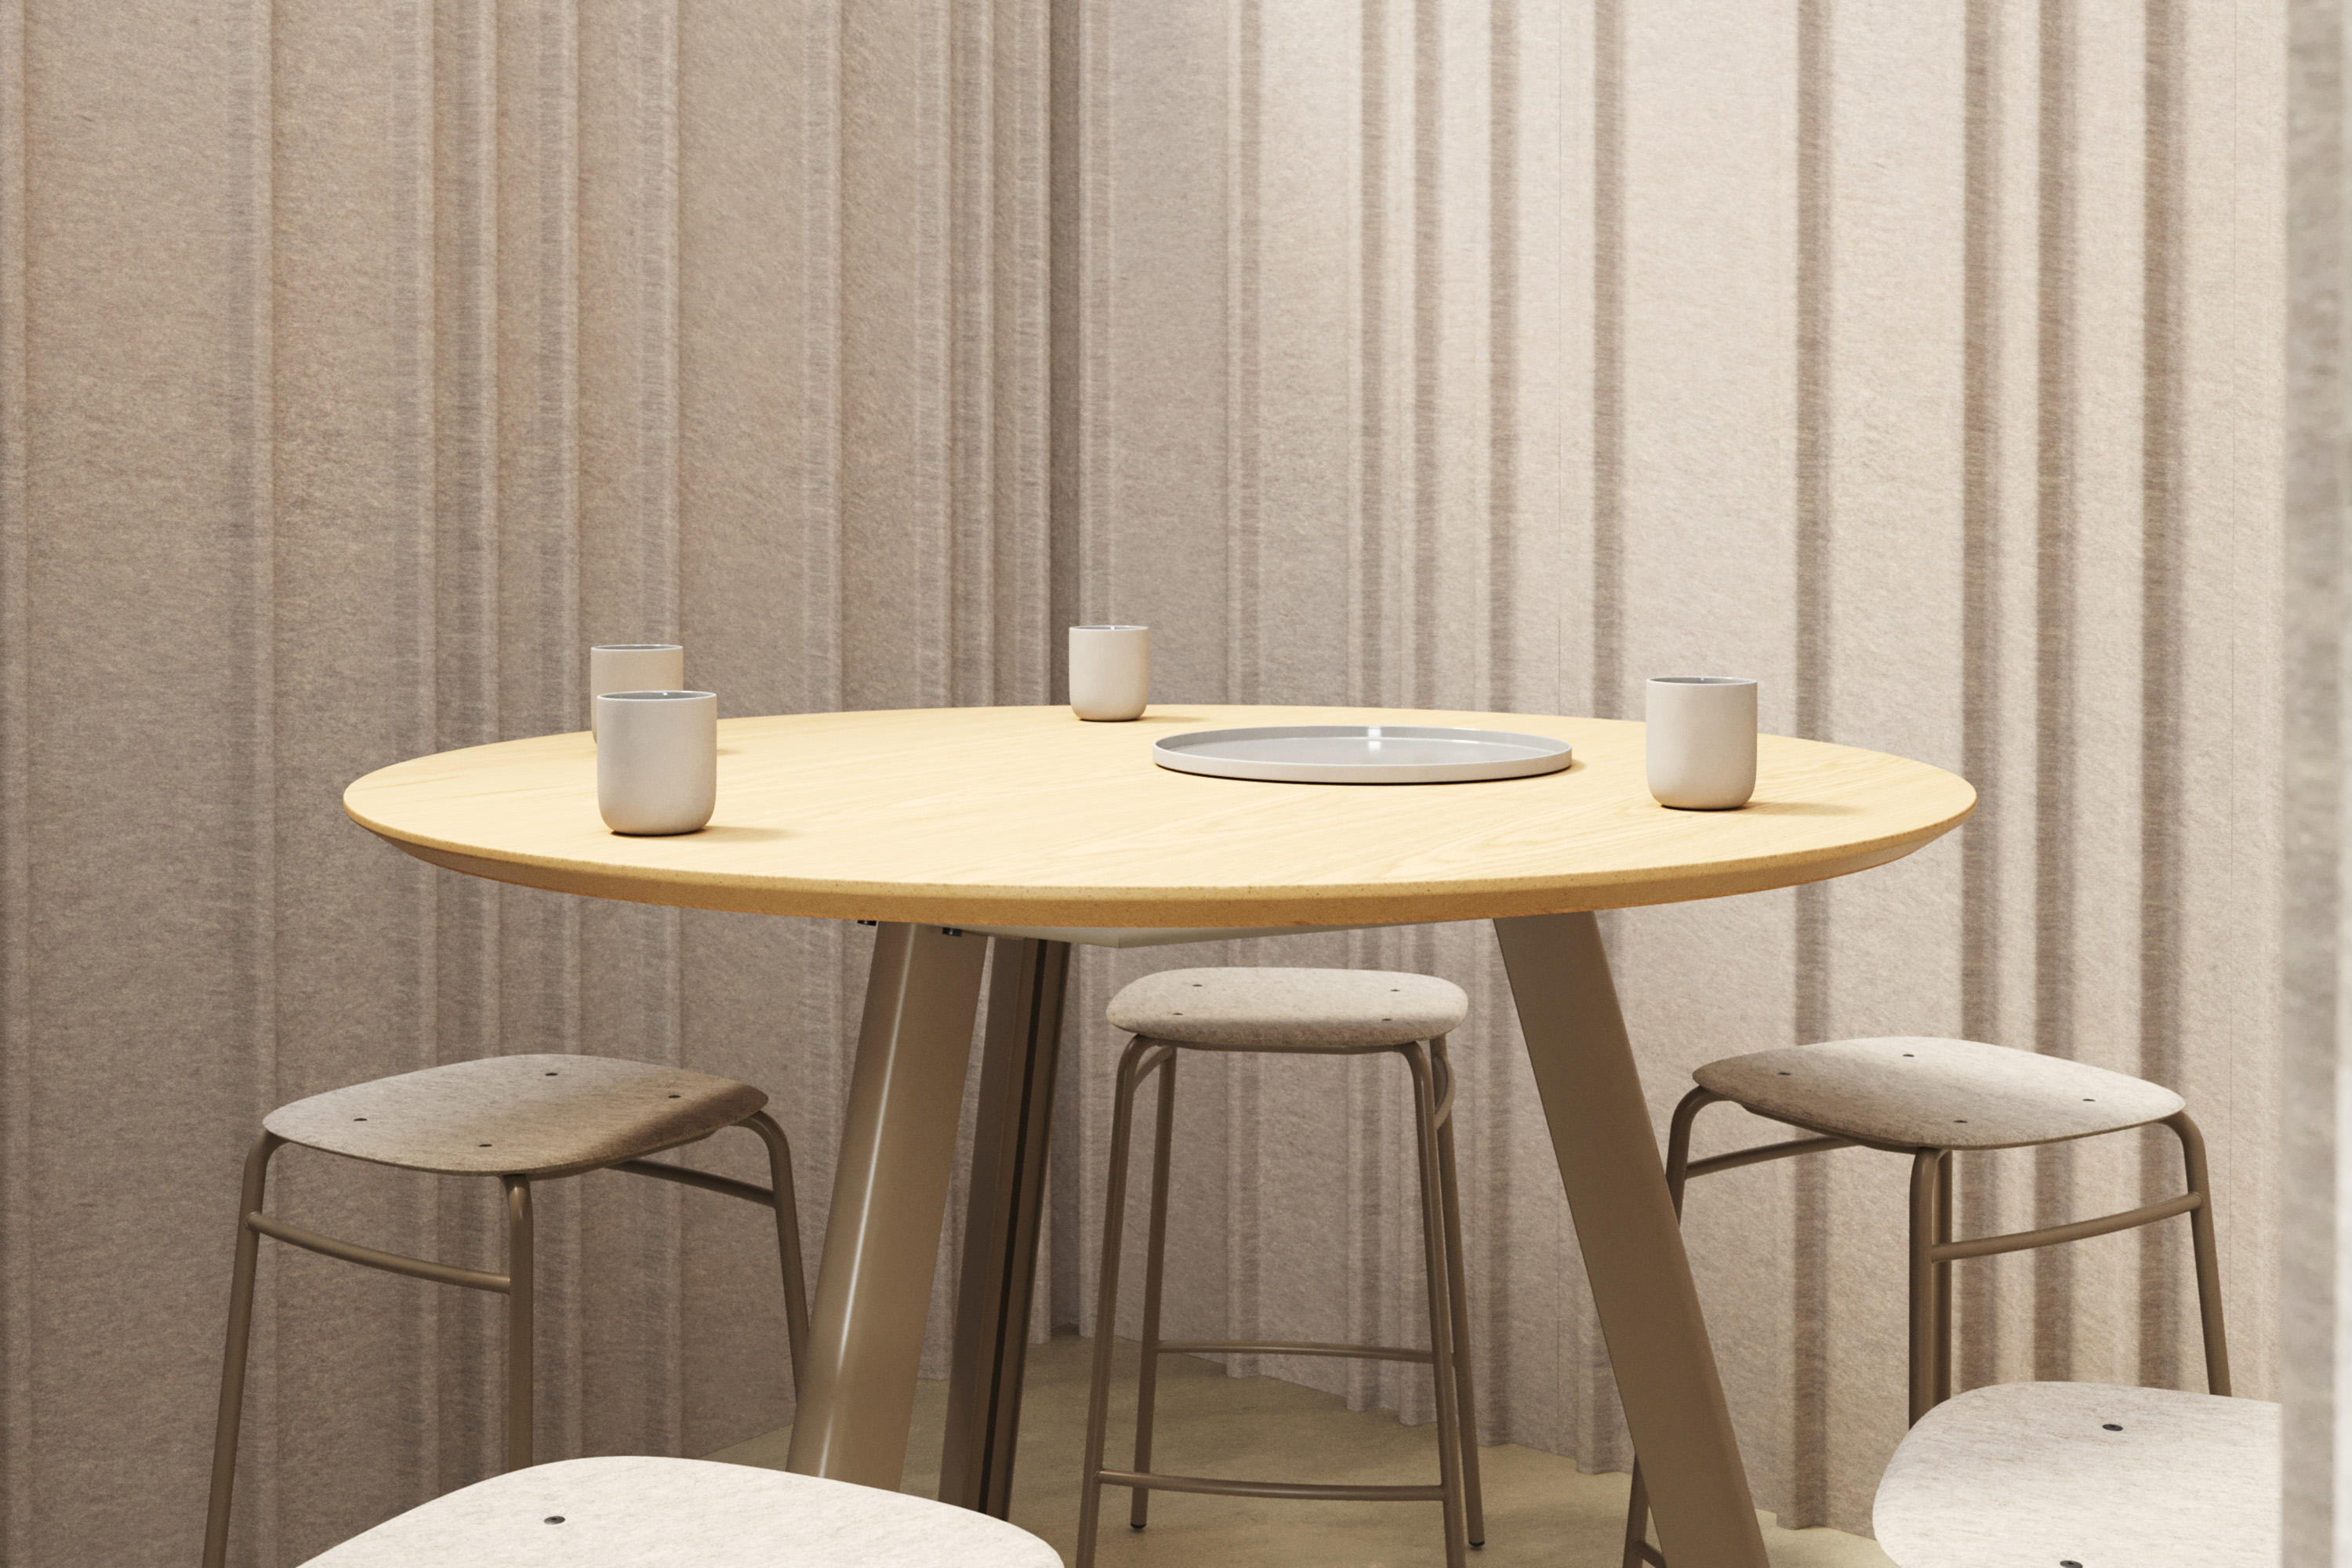 Lite Round 20 Modular Table System   Architonic